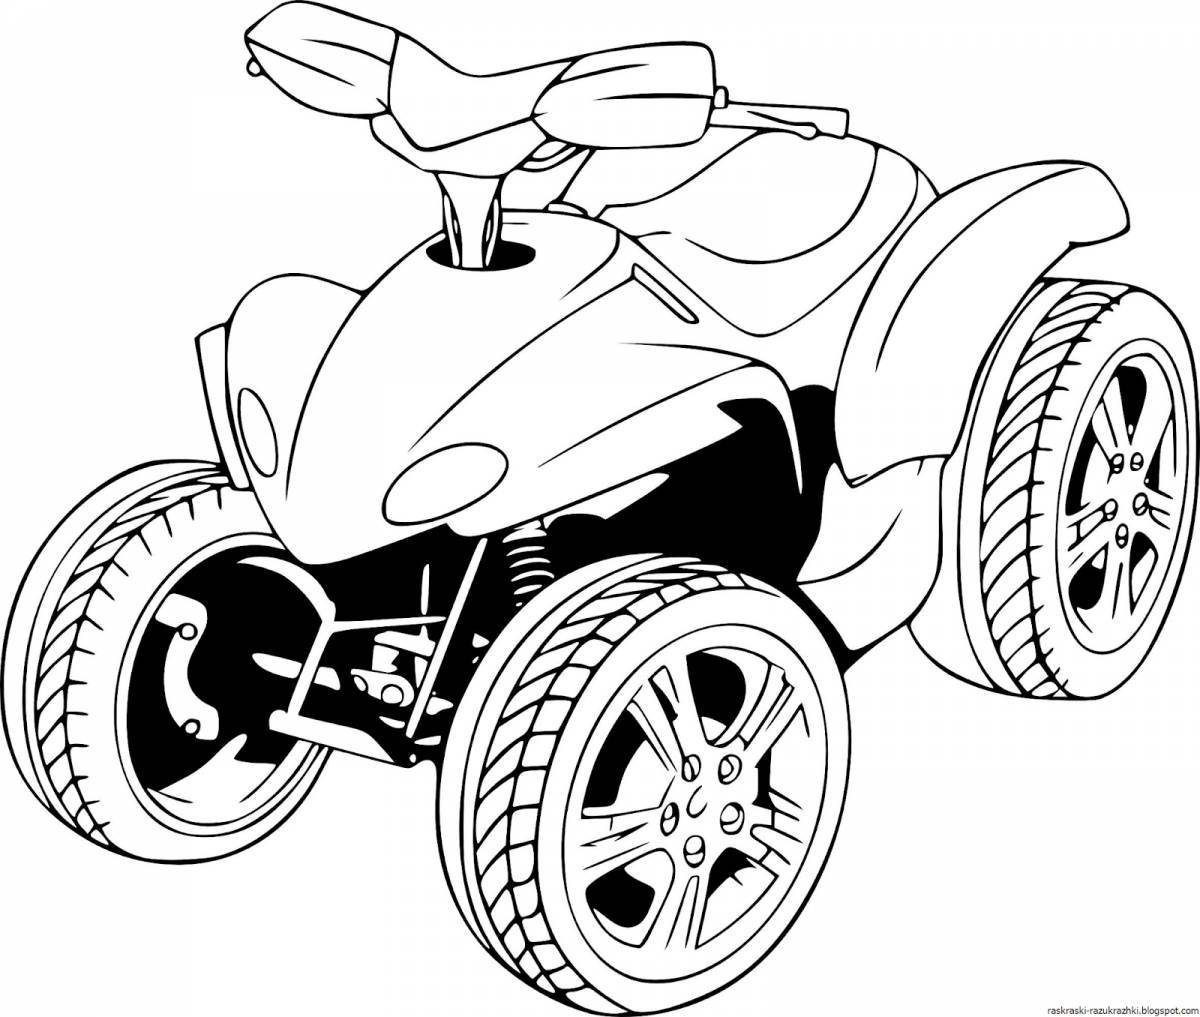 Fun coloring pages for boys